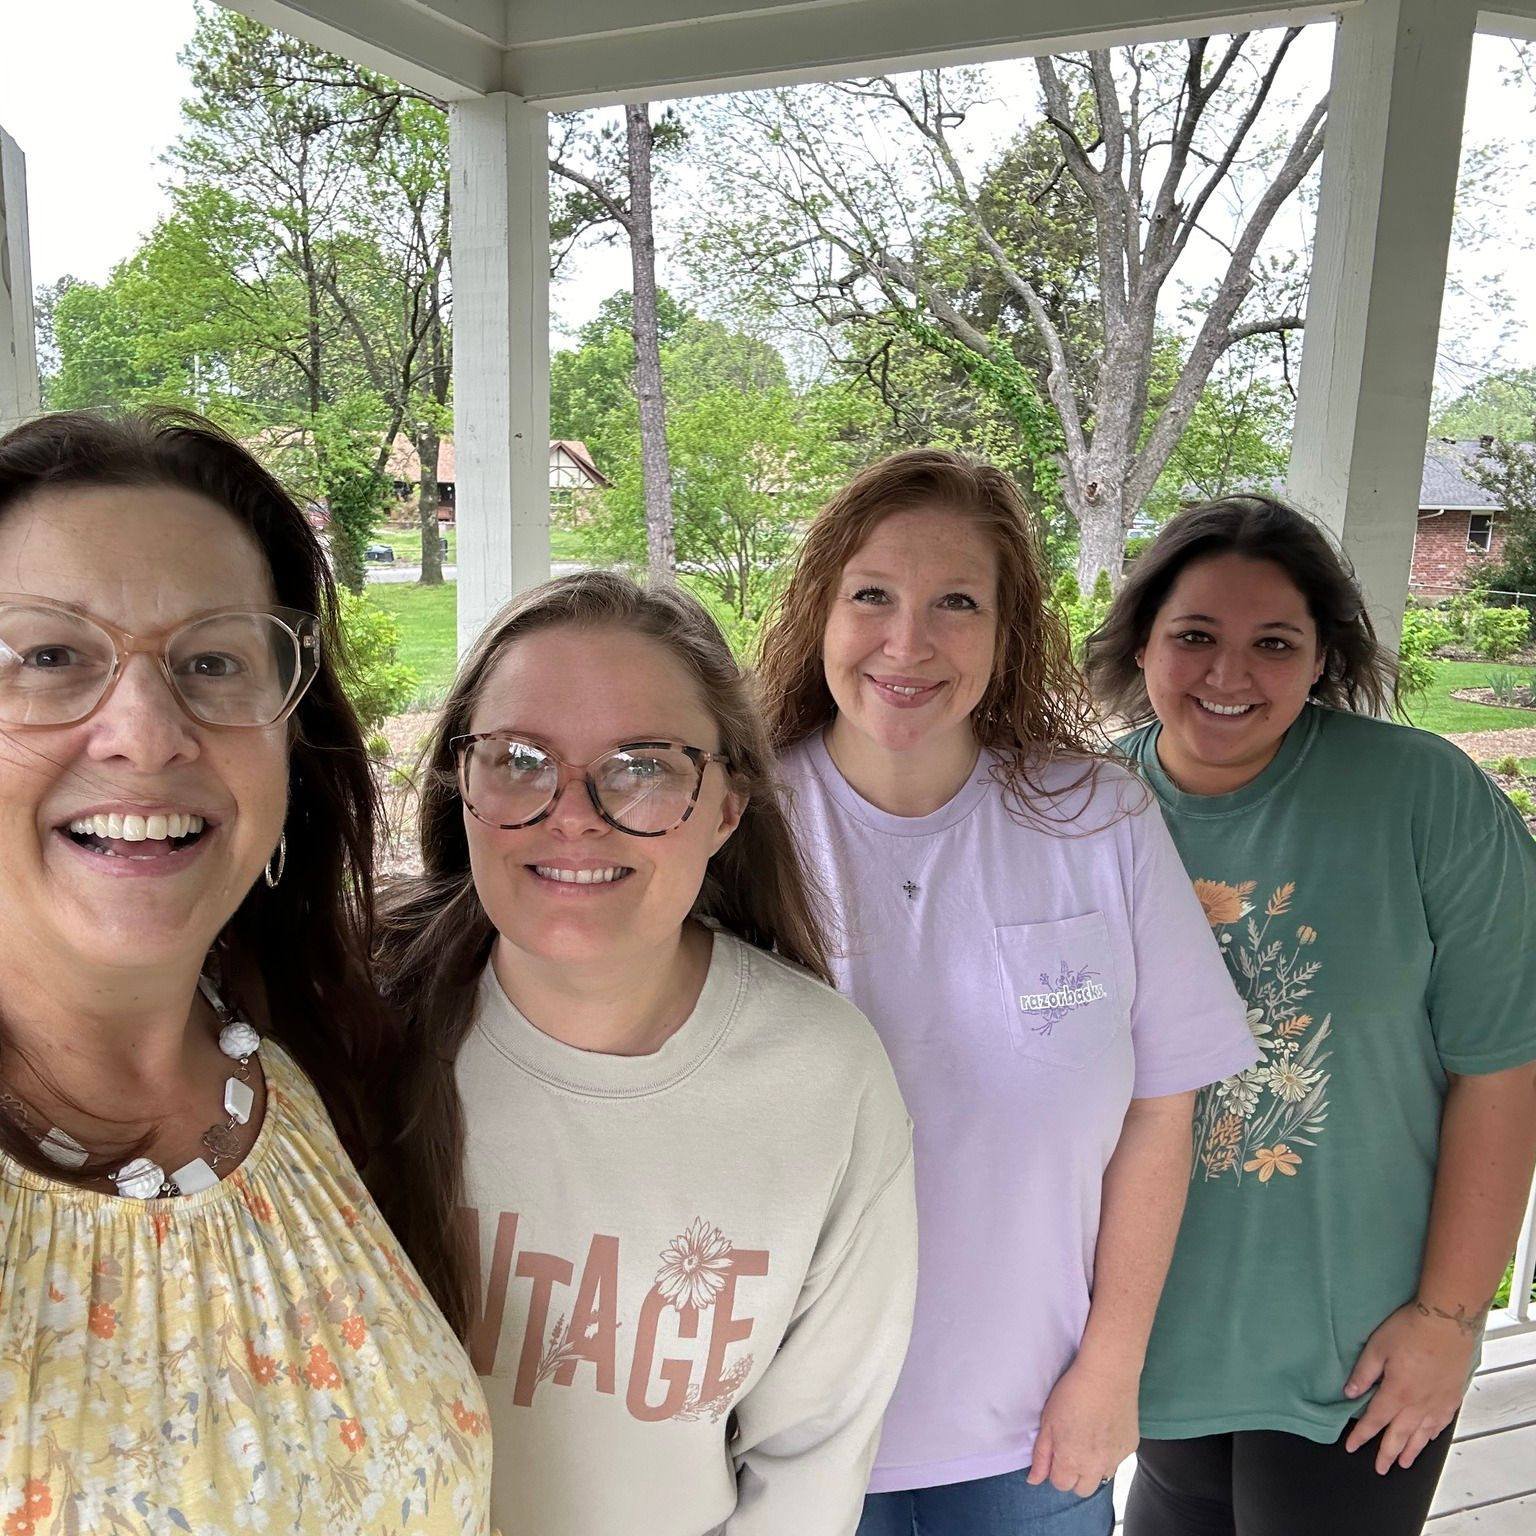 Friends, we absolutely love our Resident Assistants and the important role they play here at Saving Grace. We couldn't do this ministry without them! 

These SHEroic women spend their days at work, college, or taking care of their families, but in th